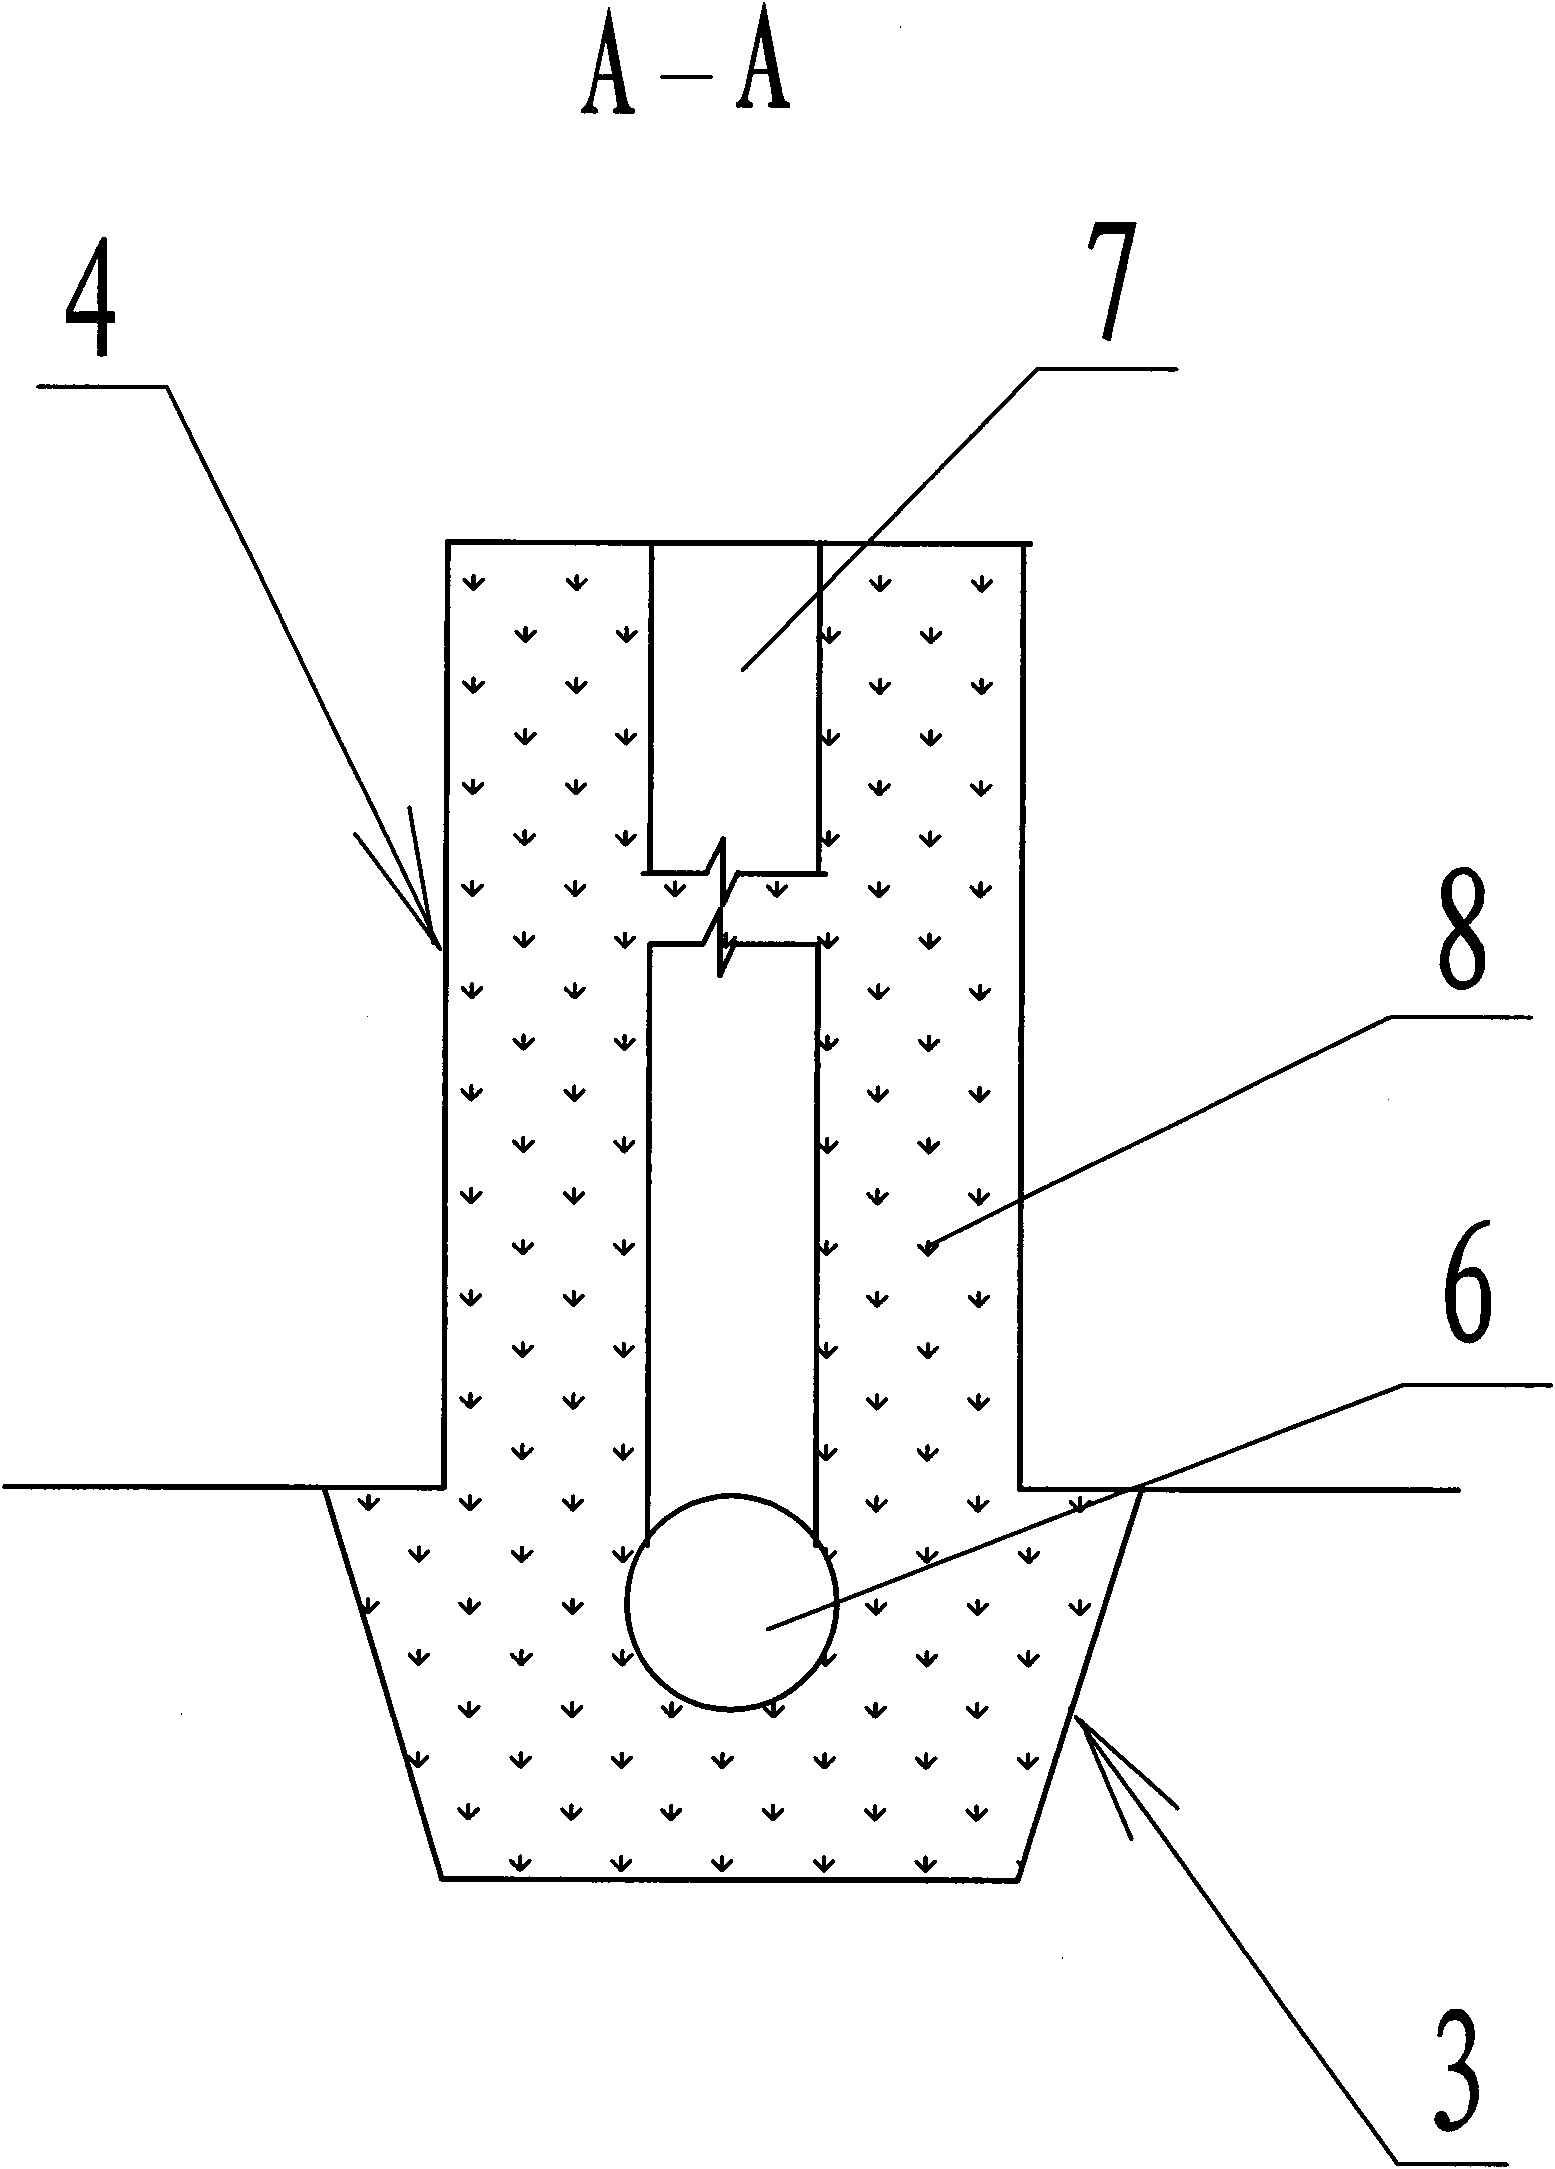 Permeable tailings pond seepage drainage structure